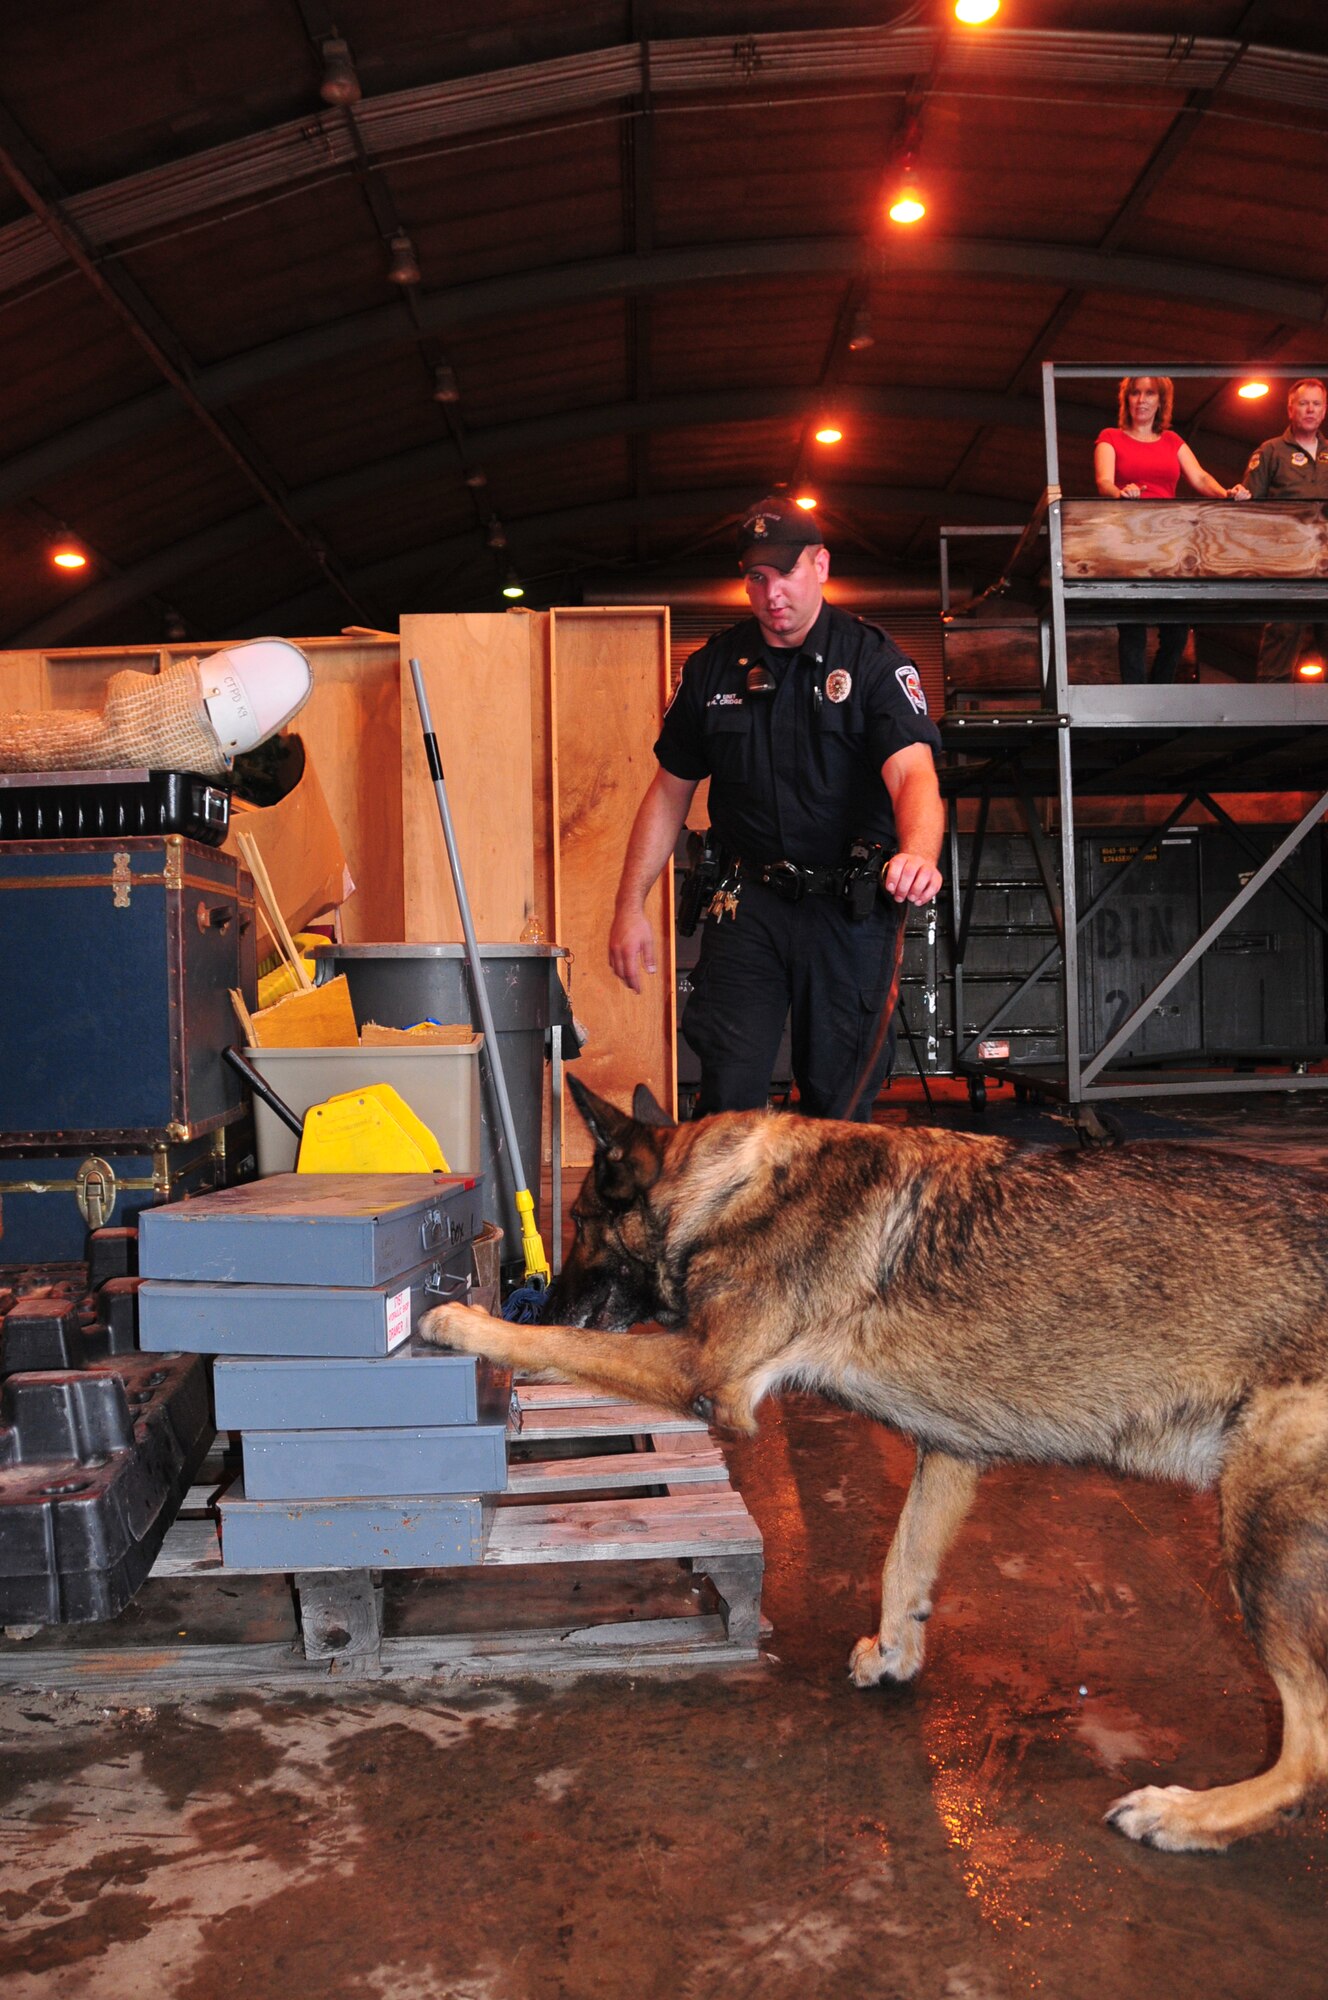 The 171st Air Refueling Wing, located near Pittsburgh, Pennsylvania, provides a secure location for local law enforcement agencies to train their K-9 units, August 28, 2013. Beaver County, Center Township, Findlay Township and Scott Township Police Departments attended. K-9 units must continuously train on building, vehicle, area, and evidence searches to fulfill training requirements. Training also includes apprehension, narcotic detection, tracking scenarios, and handler protection.  Having a secure, controlled location is important for efficient training and for the safety of the dogs. In addition to fulfilling training requirements, this combined effort also allows the 171st and local law enforcement agencies the ability to share ideas and training techniques in order to better serve the community and the commonwealth (U.S. Air National Guard Photo by Tech. Sgt. Shawn Monk/Released)